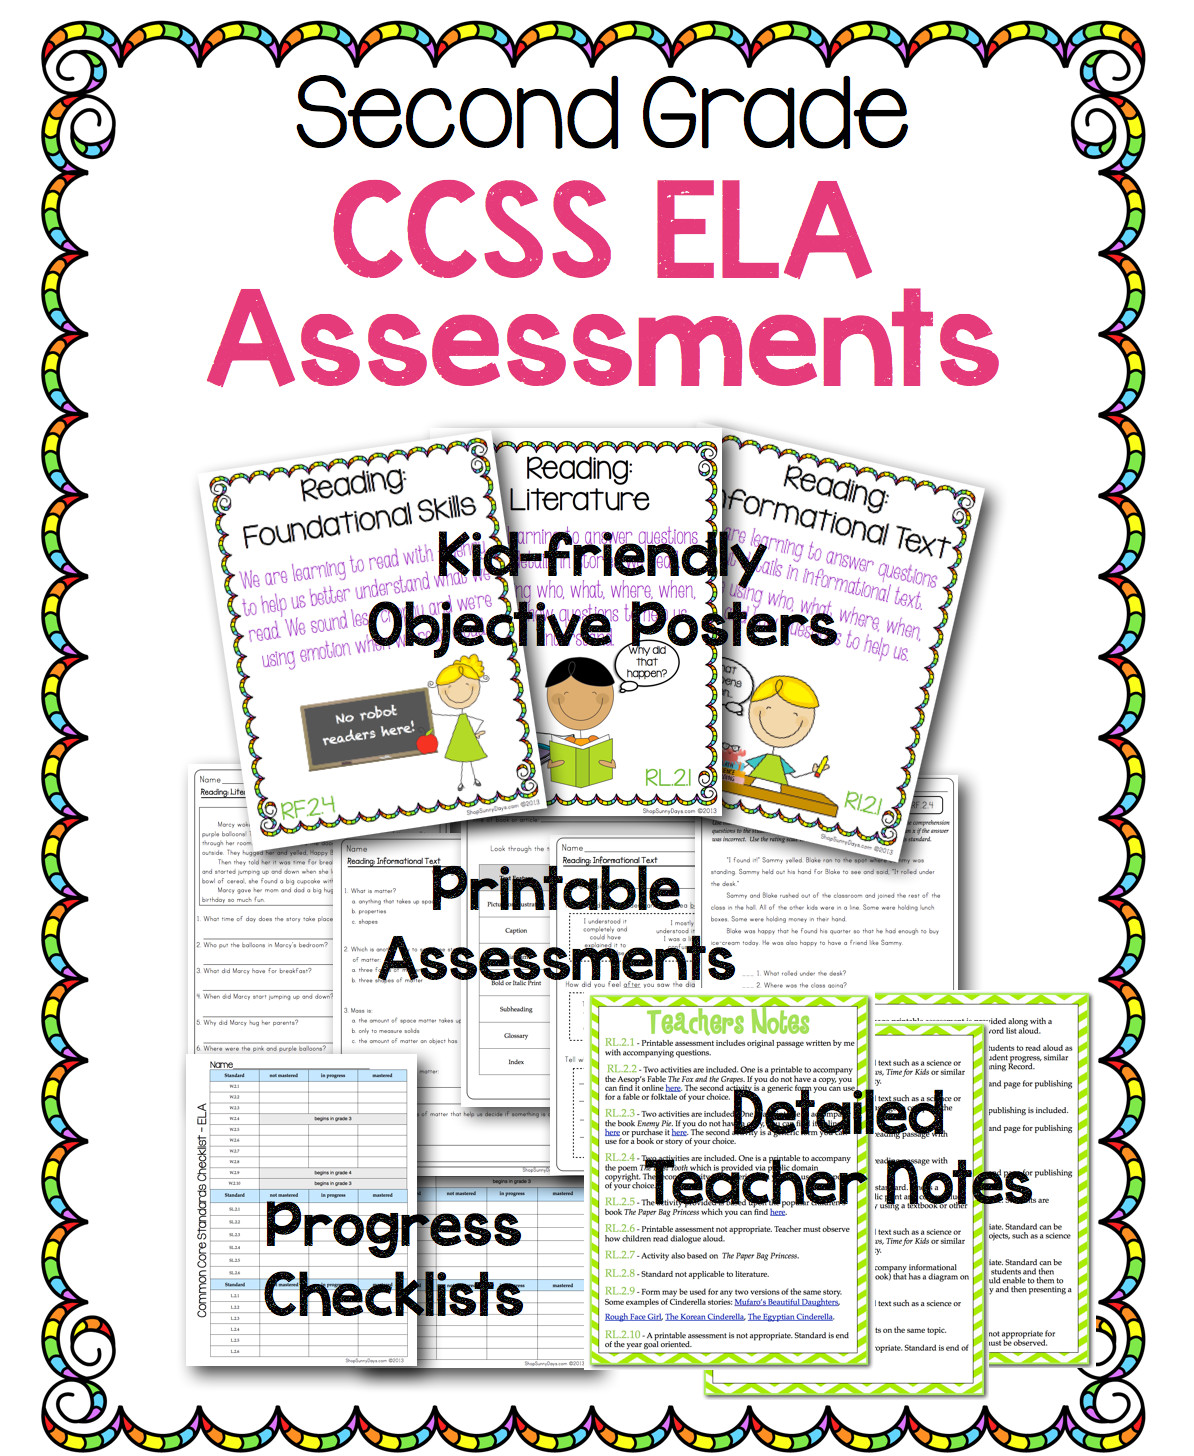 Common Core ELA Assessments for 2nd Grade